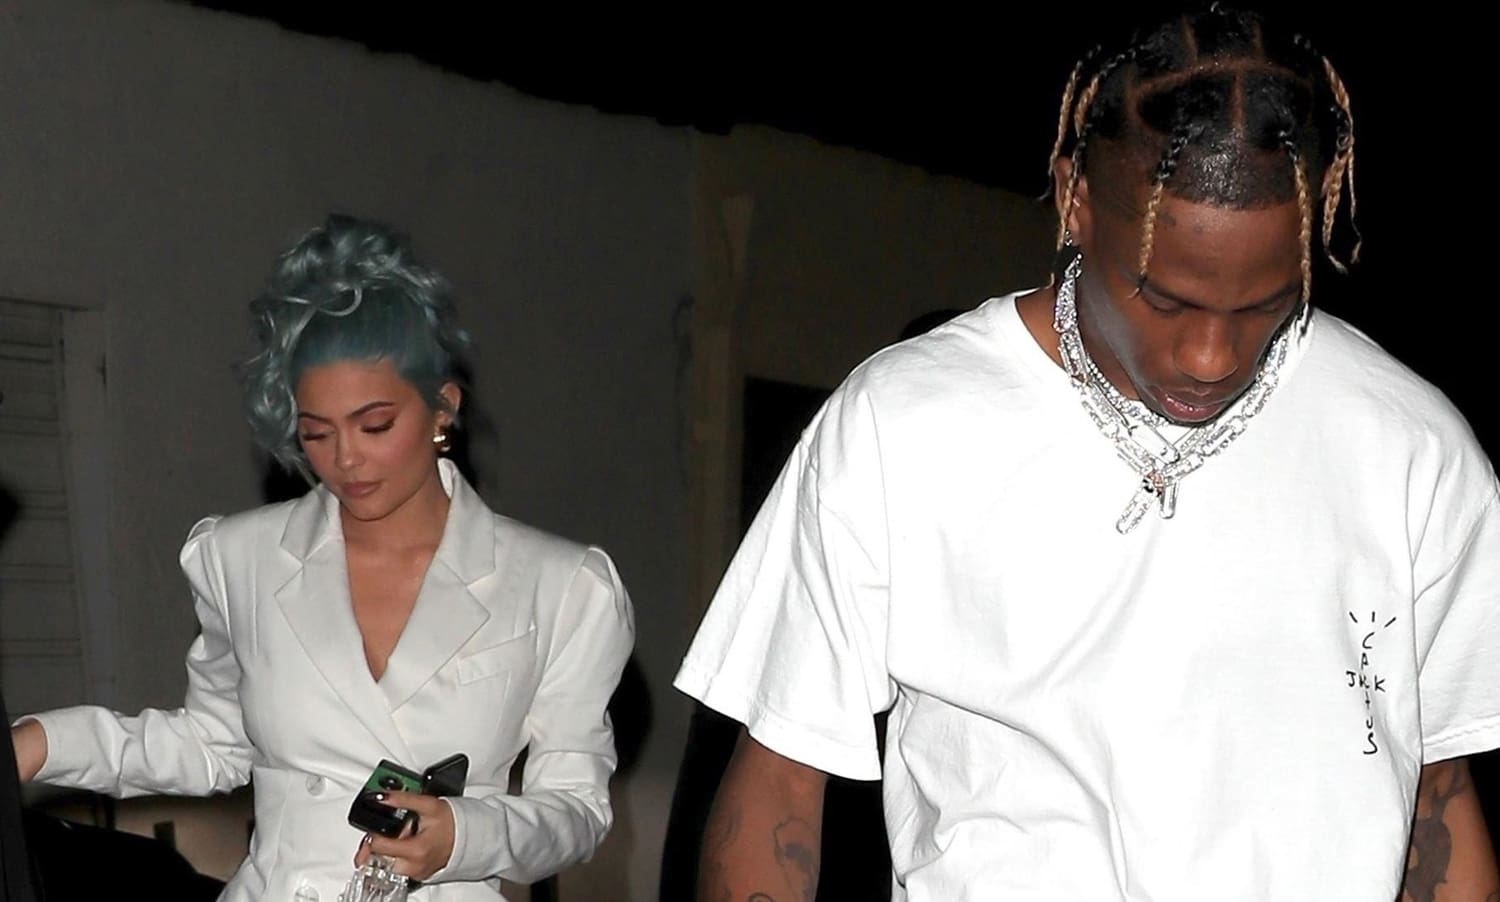 Kylie Jenner And Travis Scott Were Spotted Having Dinner Together - They Reportedly Plan A Vacay To Work On Their Relationship Following The Cheating Rumors